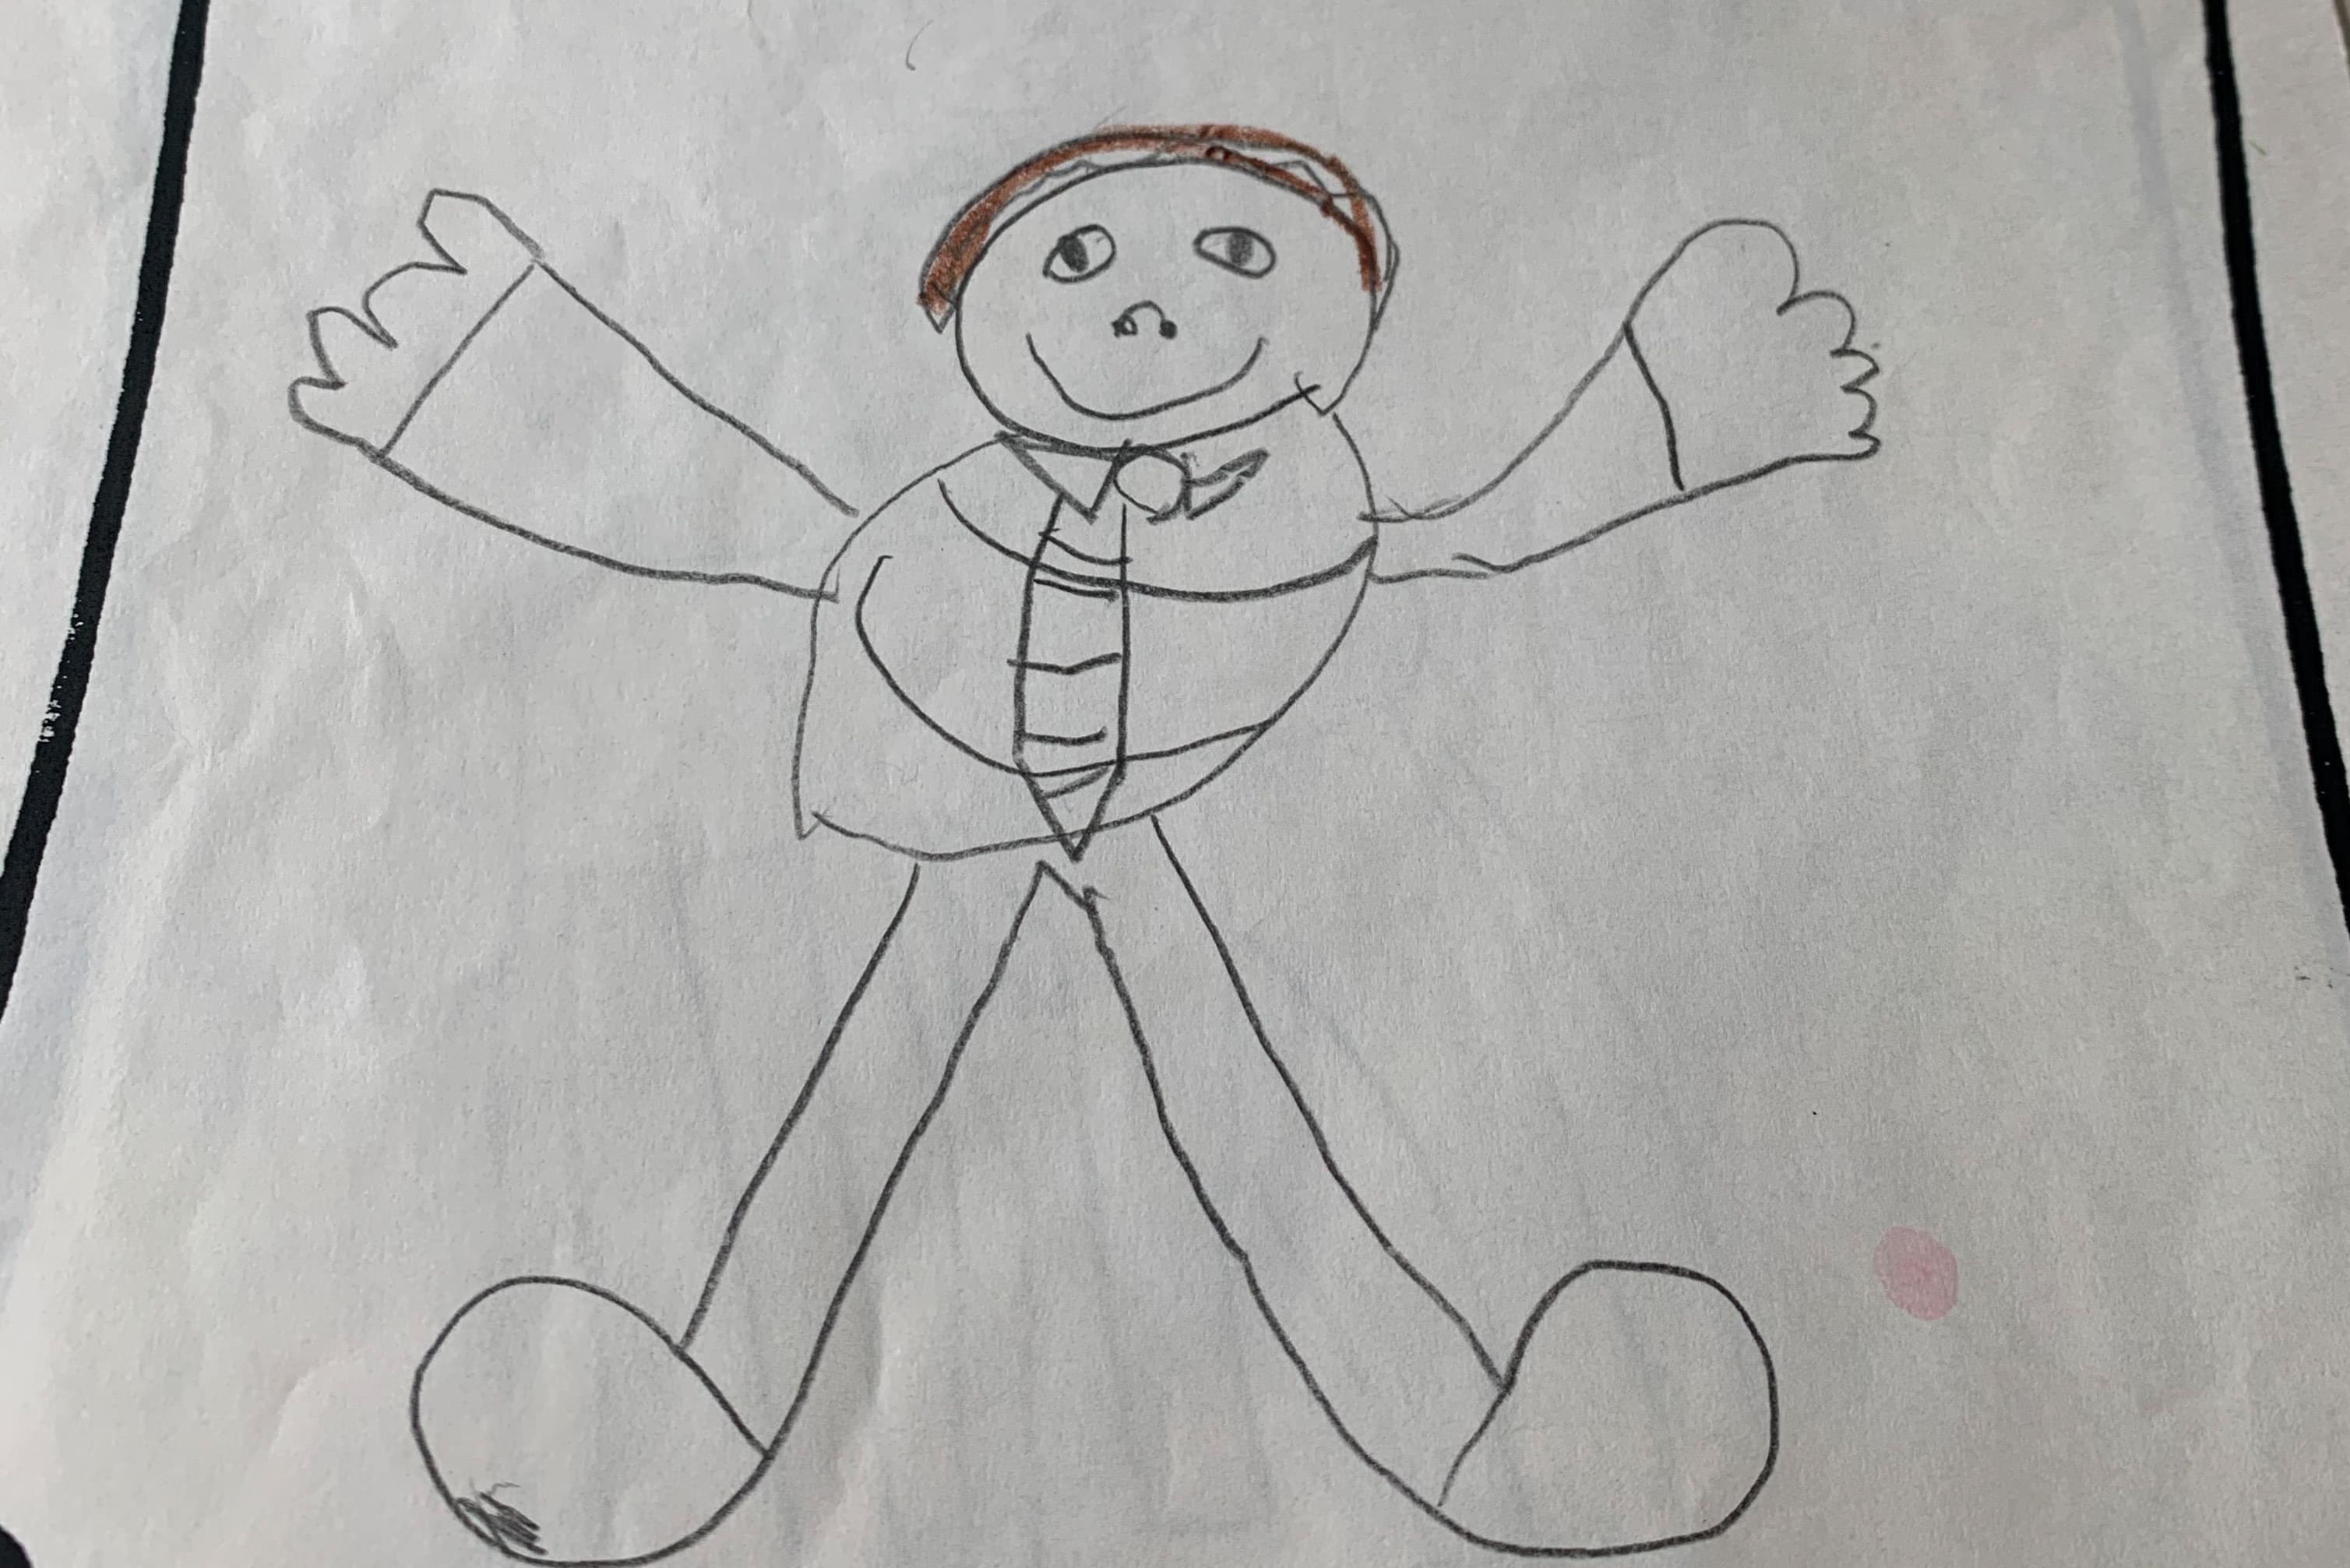 Your Kid’s Drawings Tell You How They Feel